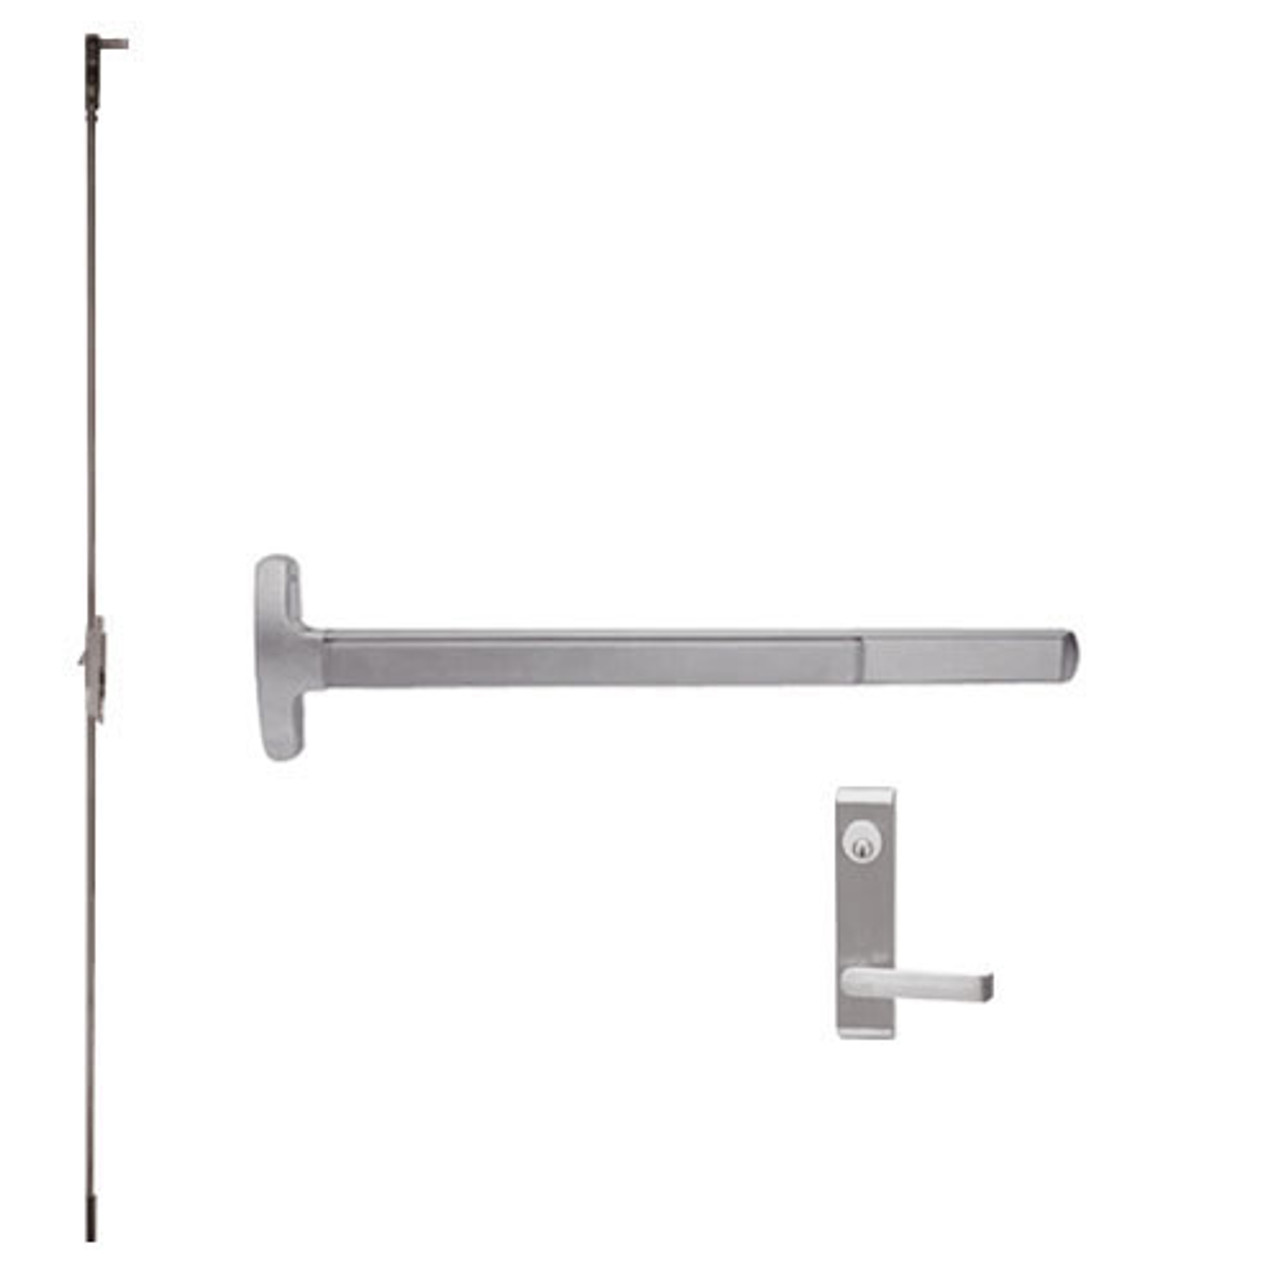 F-24-C-L-NL-DANE-US32D-4-LHR Falcon Exit Device in Satin Stainless Steel